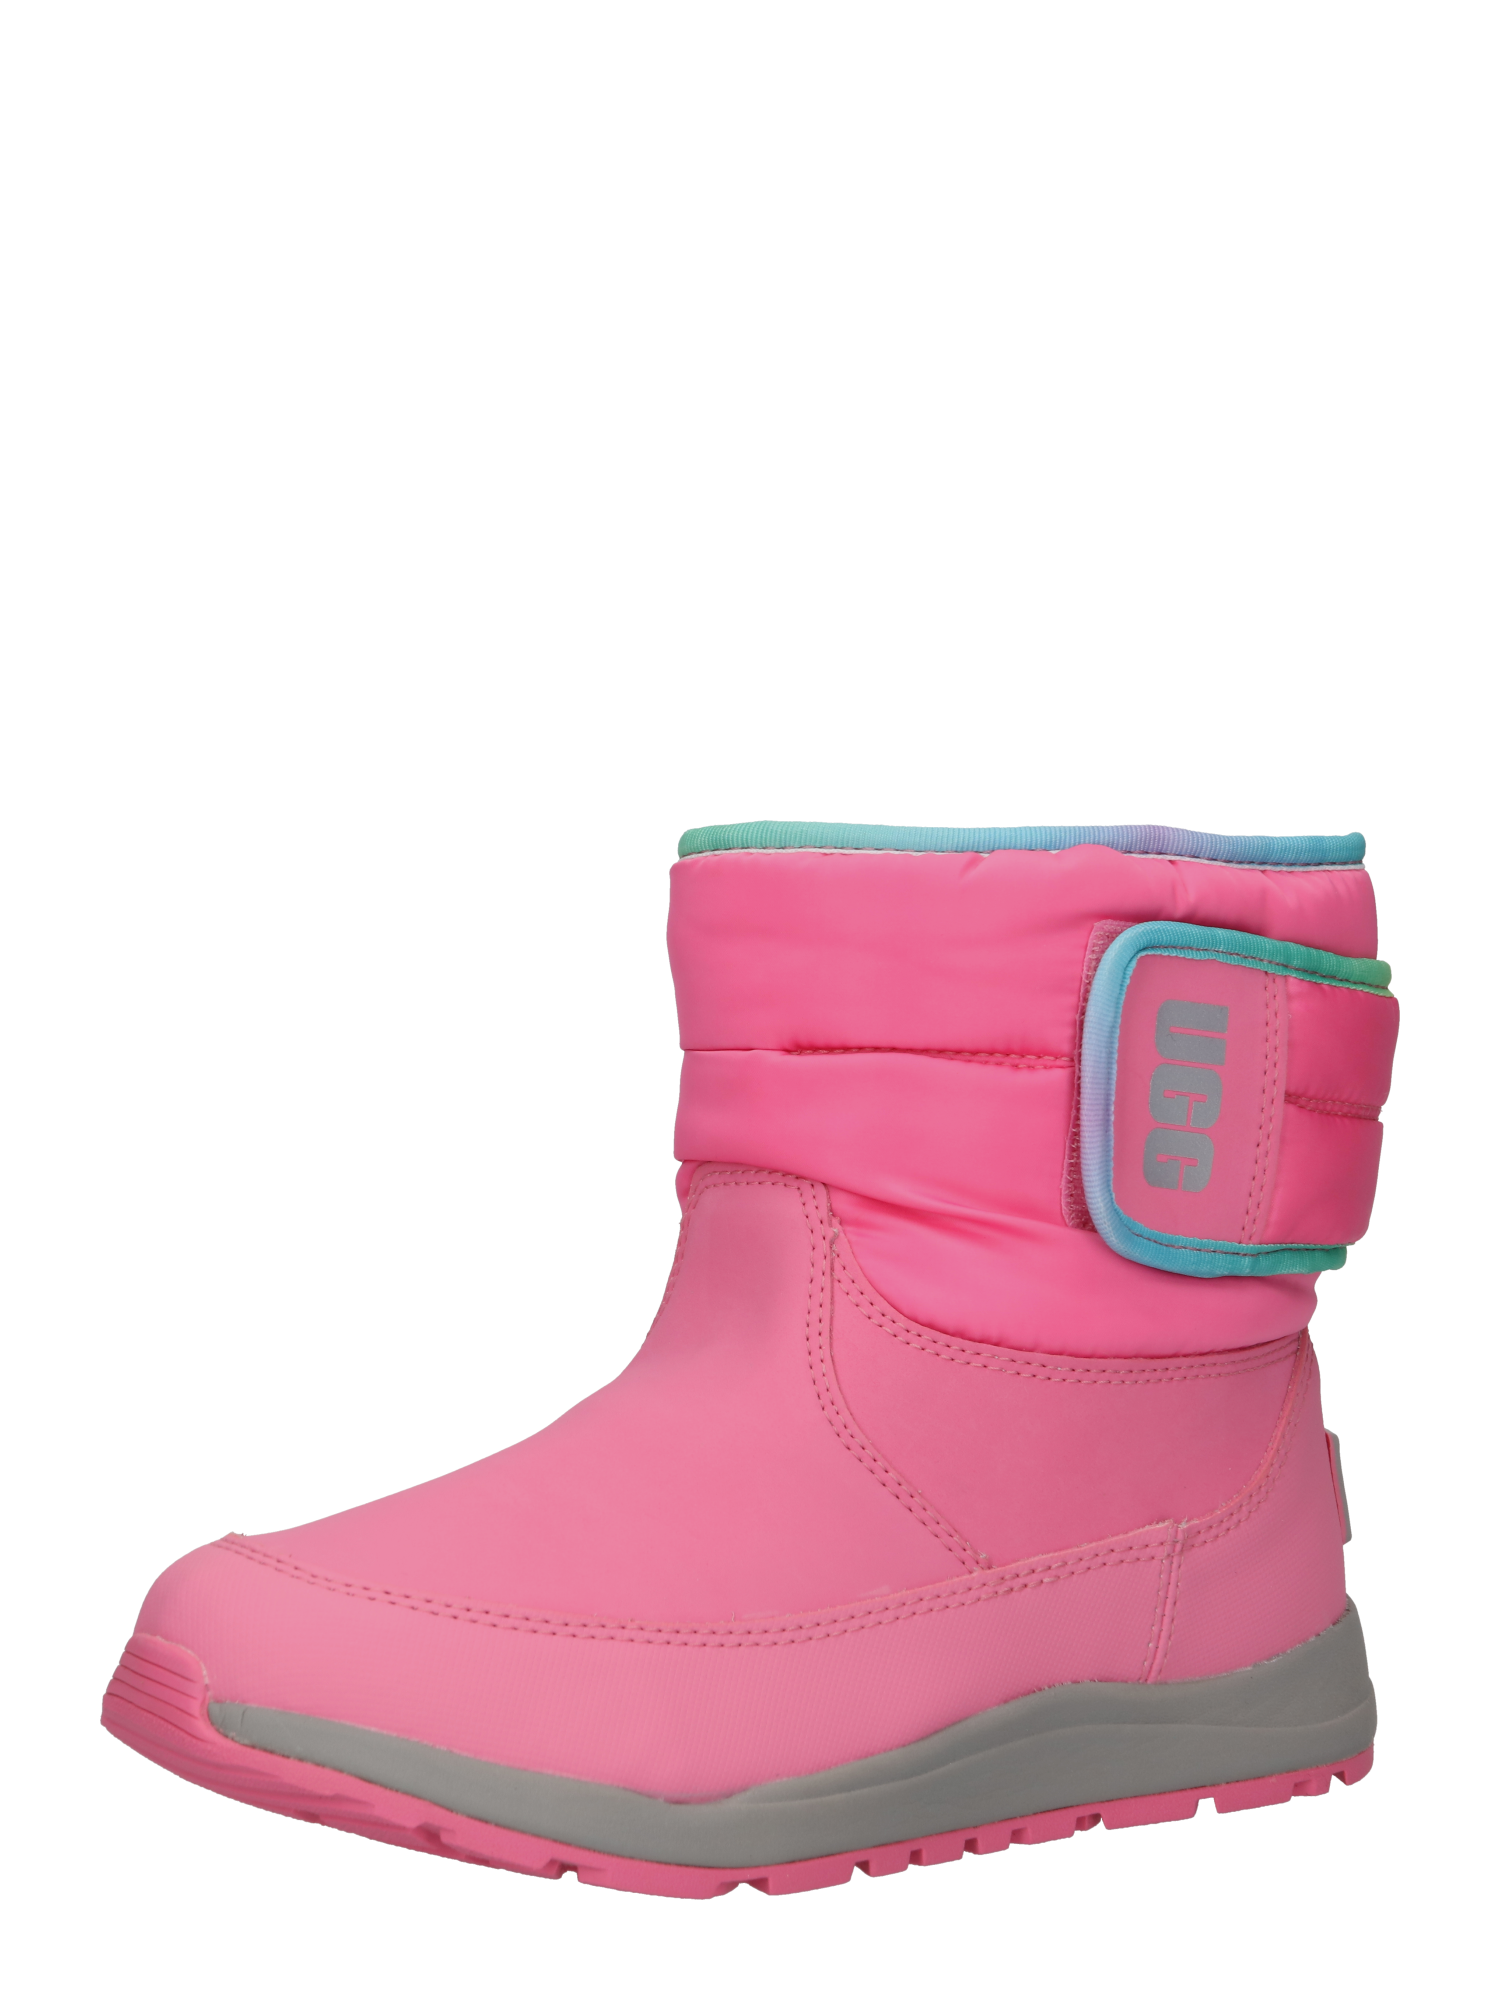 Bambina (taglie 92-140) zUYVR UGG Boots da neve TOTY WEATHER in Rosa 